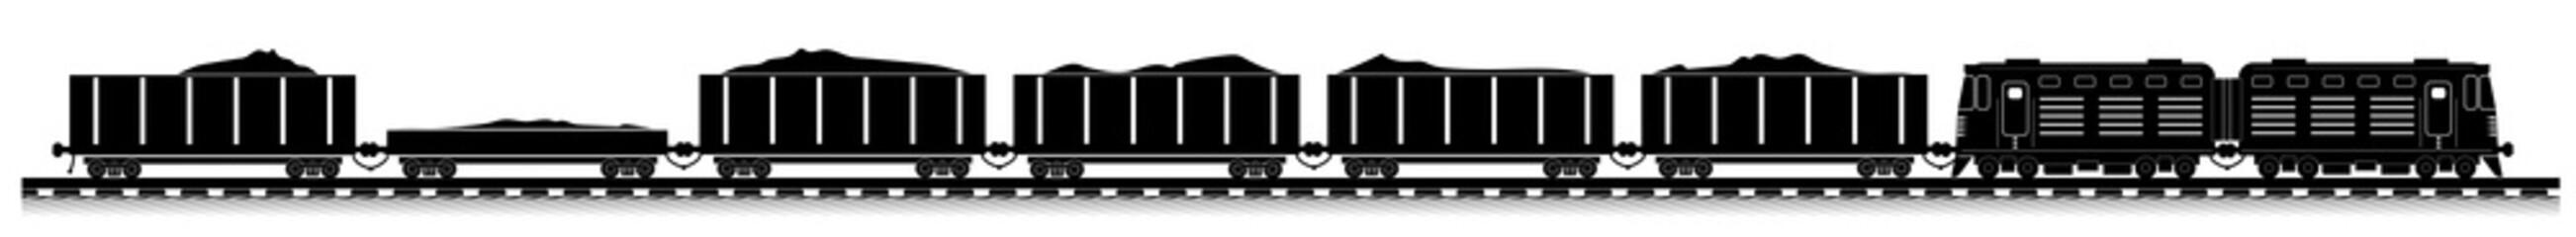 Railway train with locomotive and wagons. Side view.